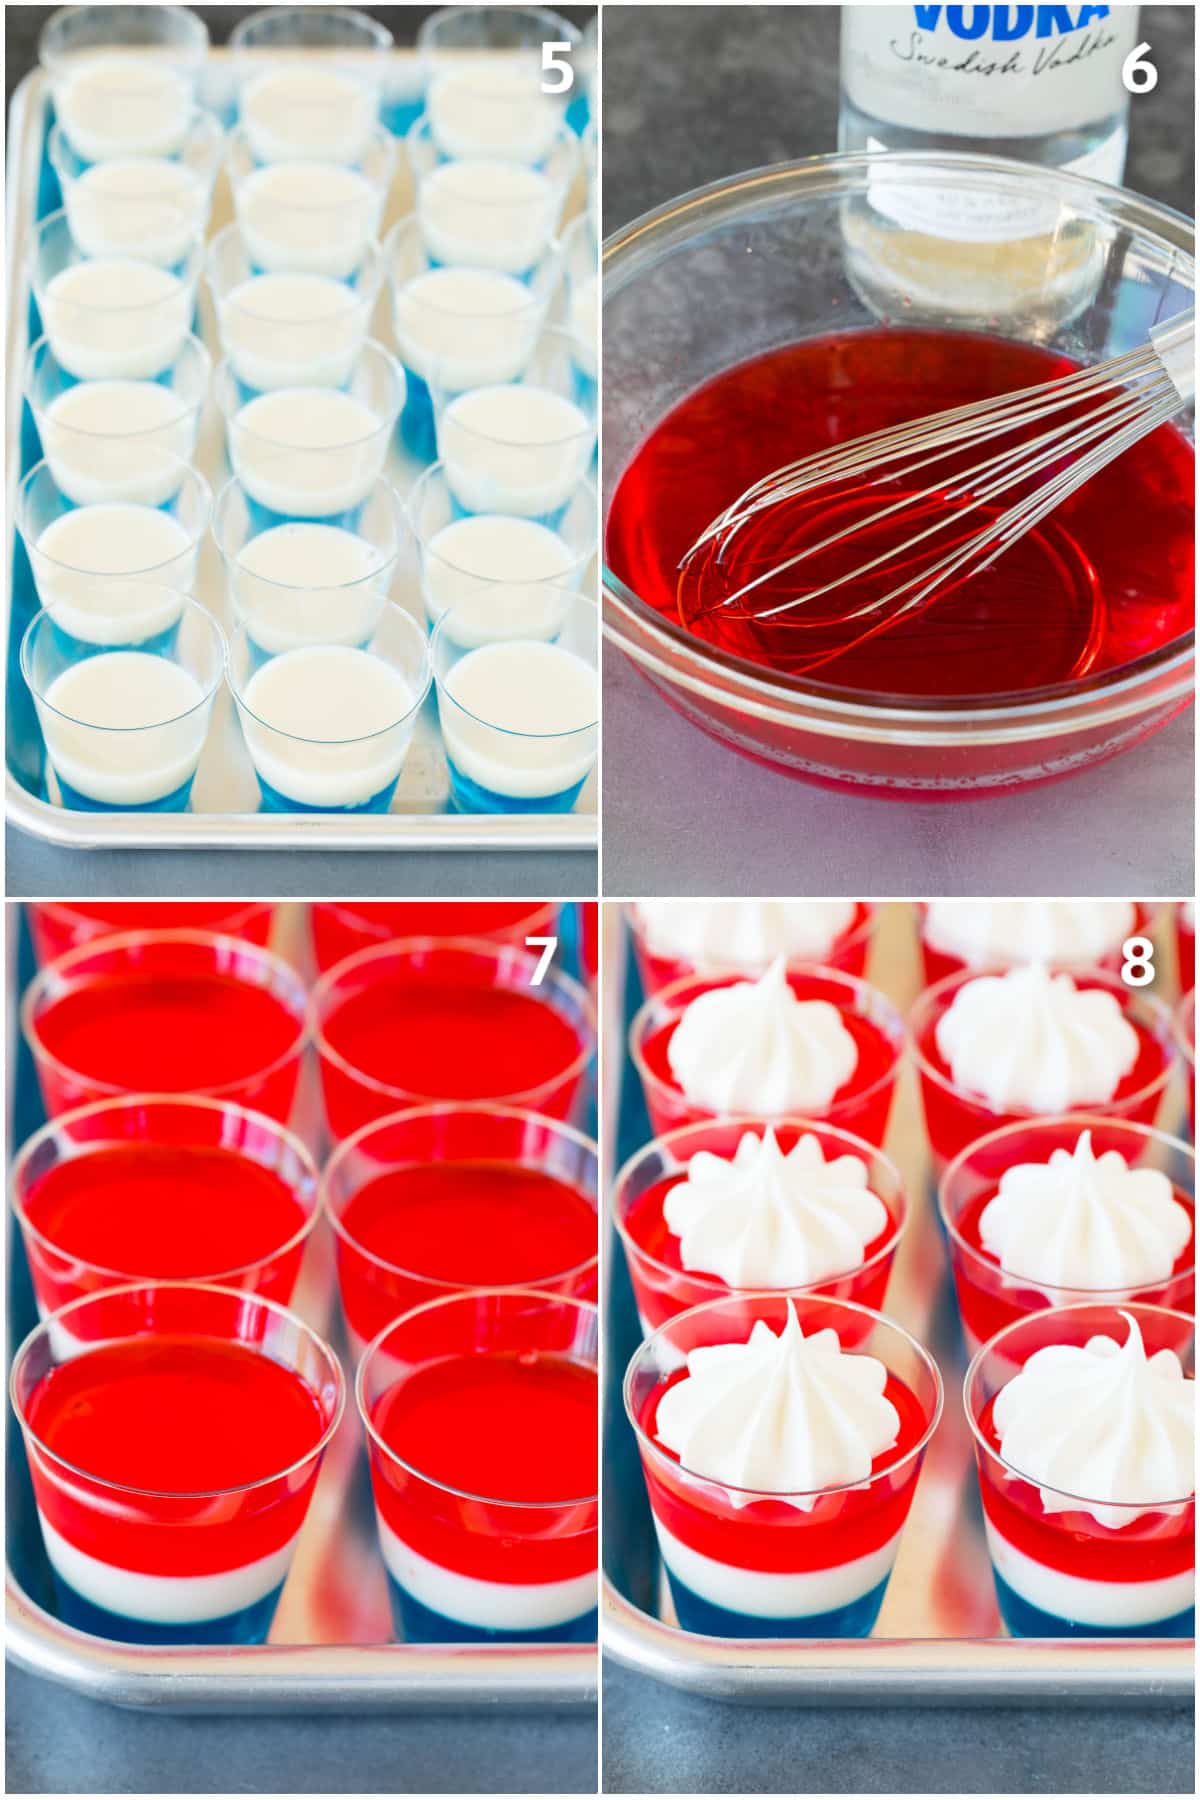 Red, white and blue gelatin being layered into cups.